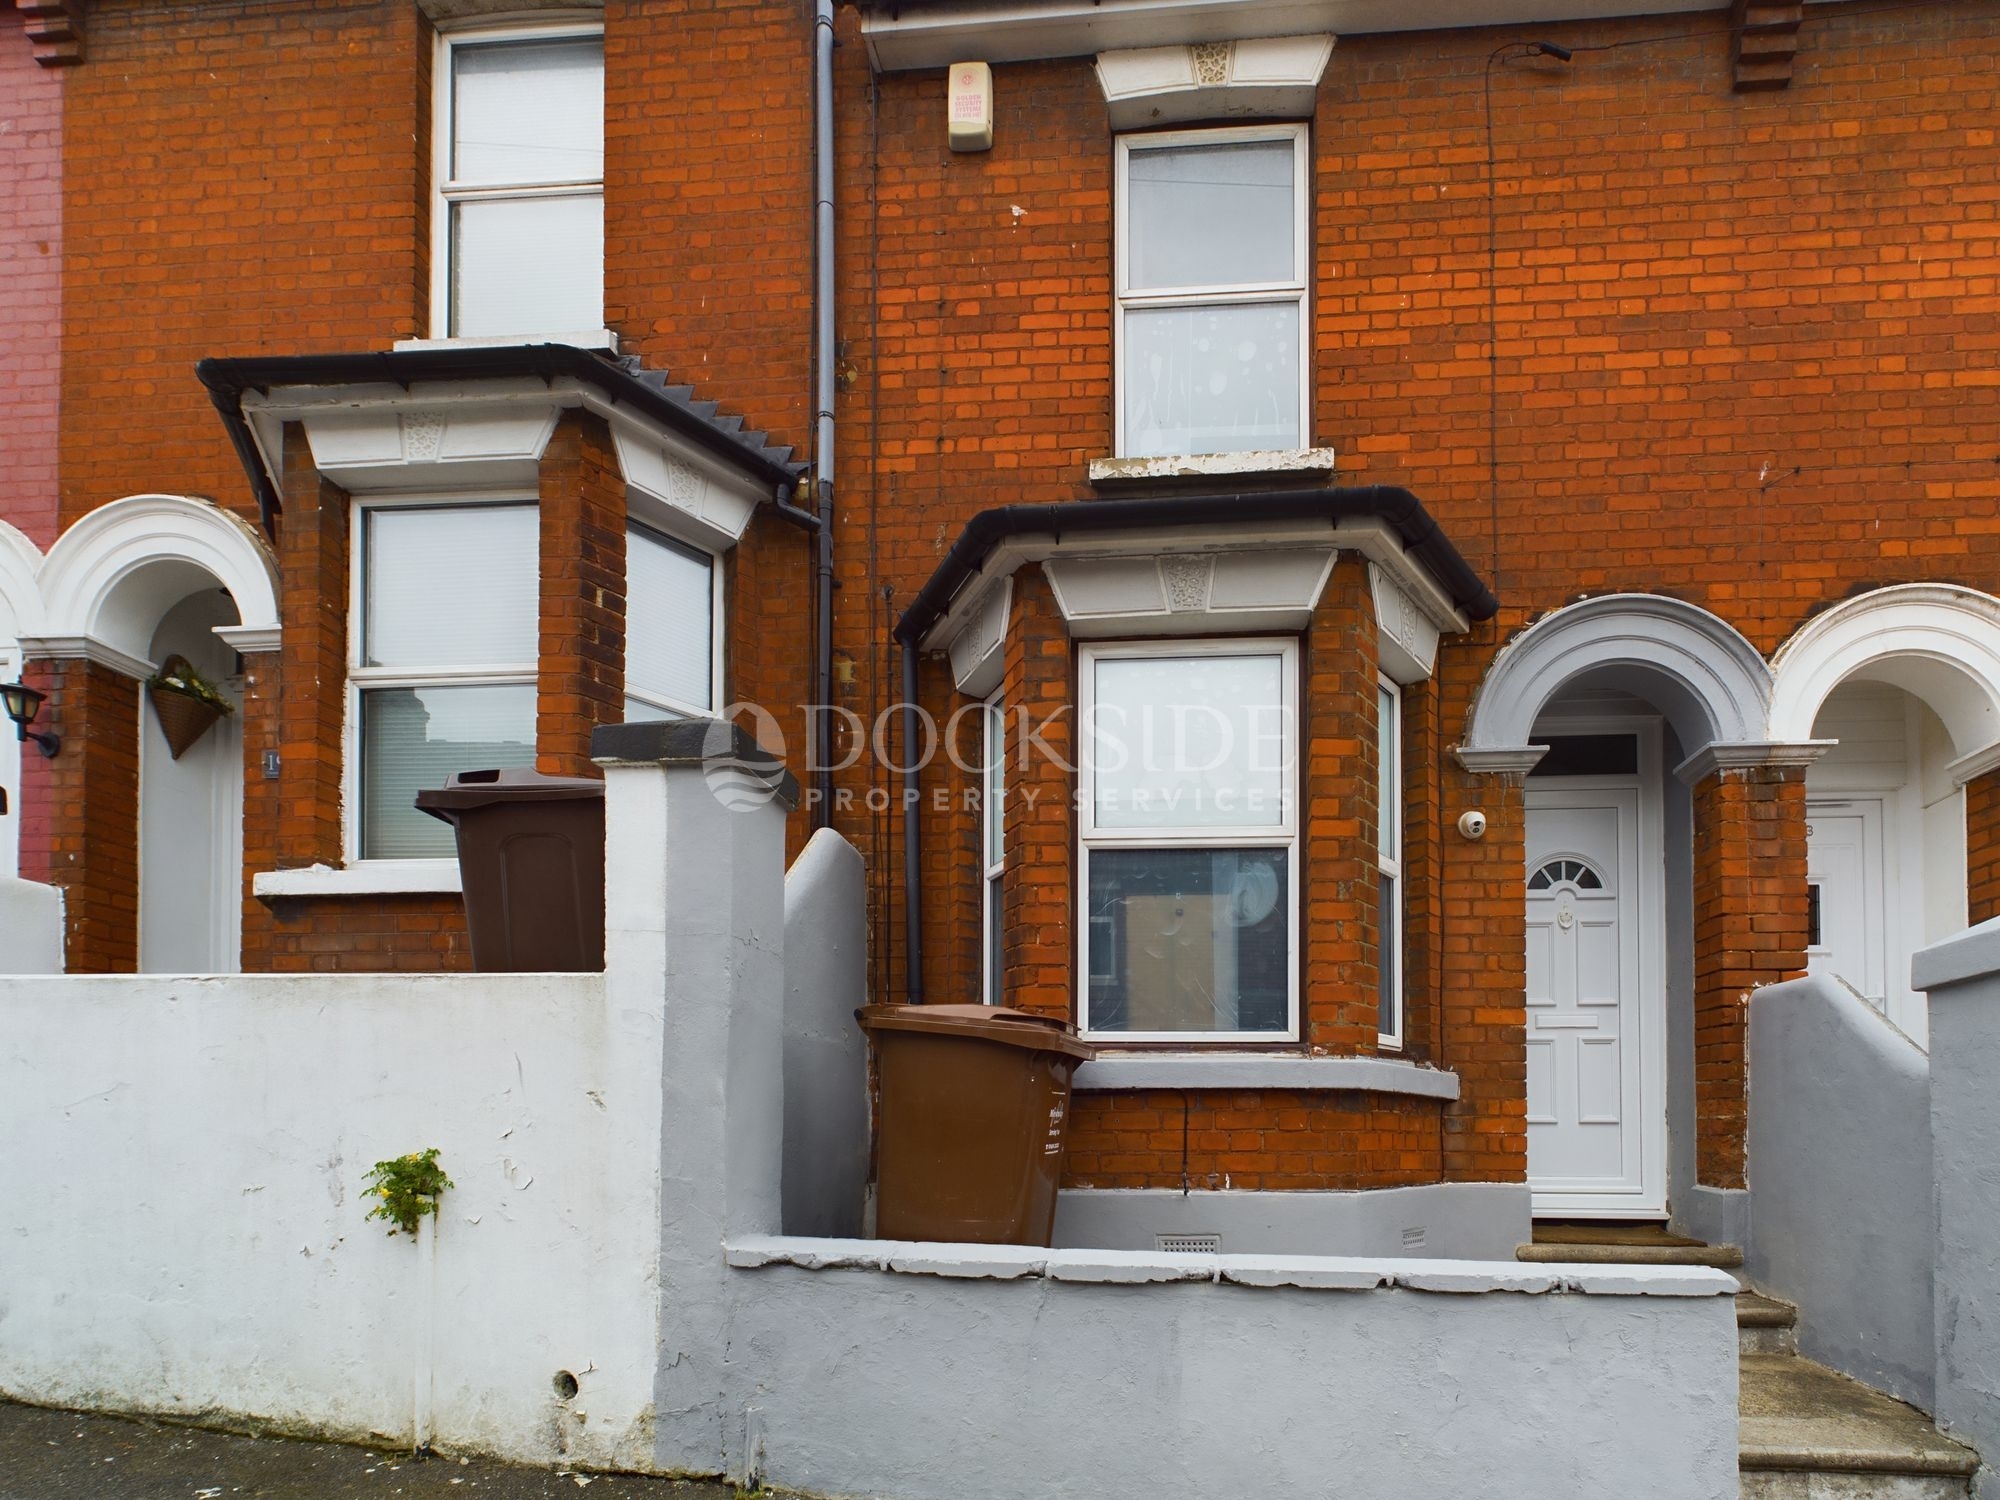 3 bed house to rent in Curzon Road, Chatham  - Property Image 5